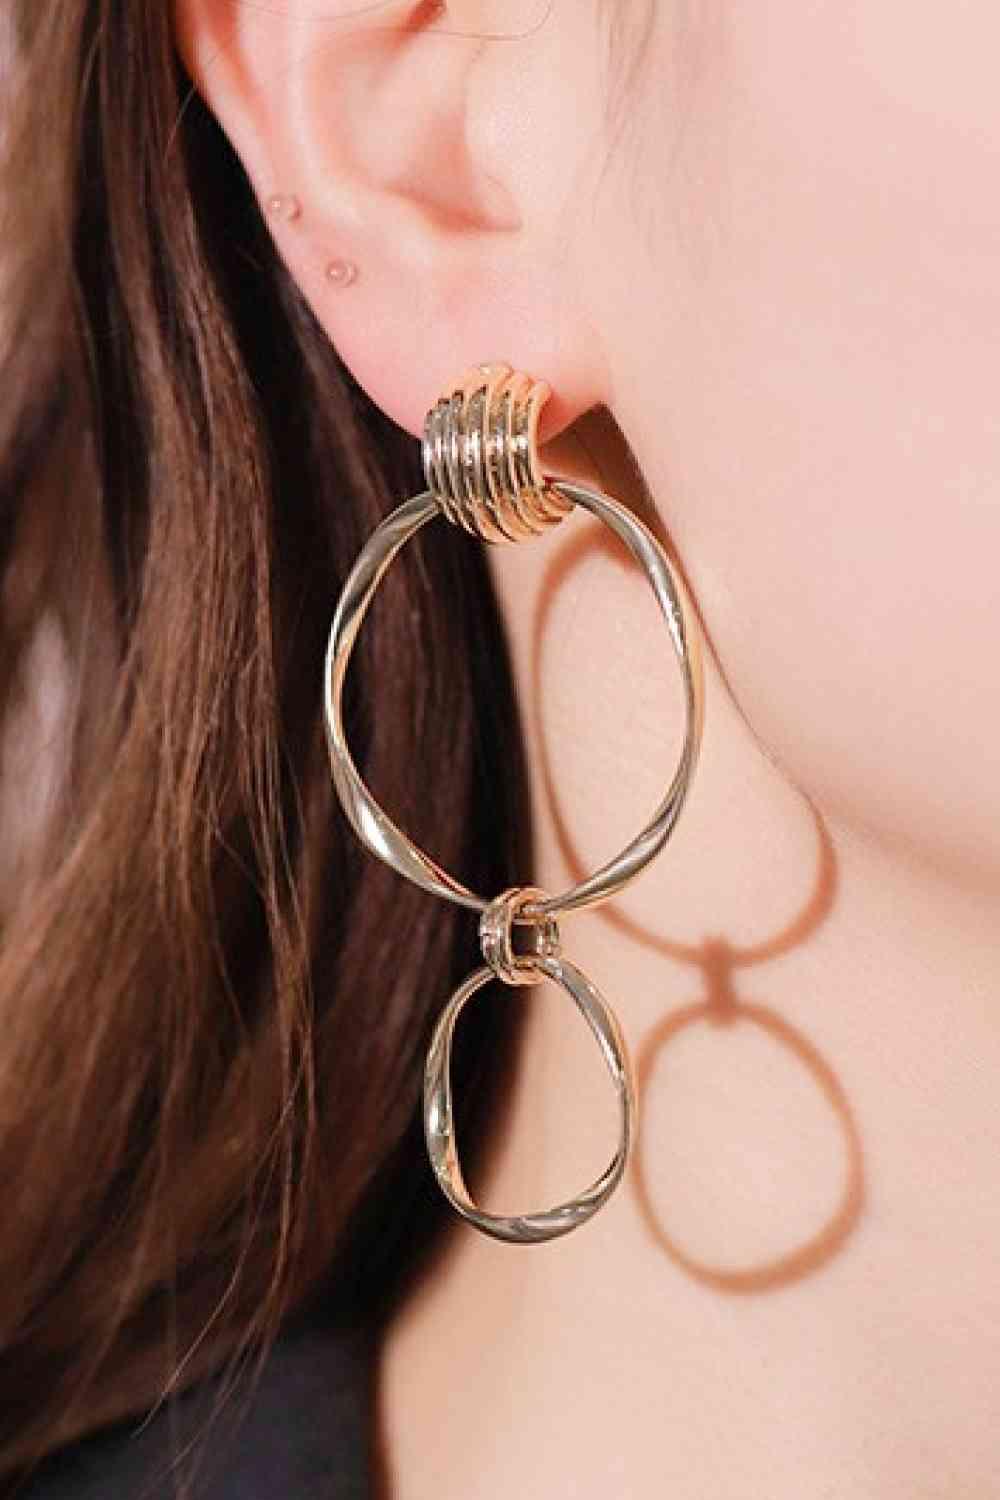 Get Noticed with Stylish Hoop Drop Earrings - Classic & Modern Pick!